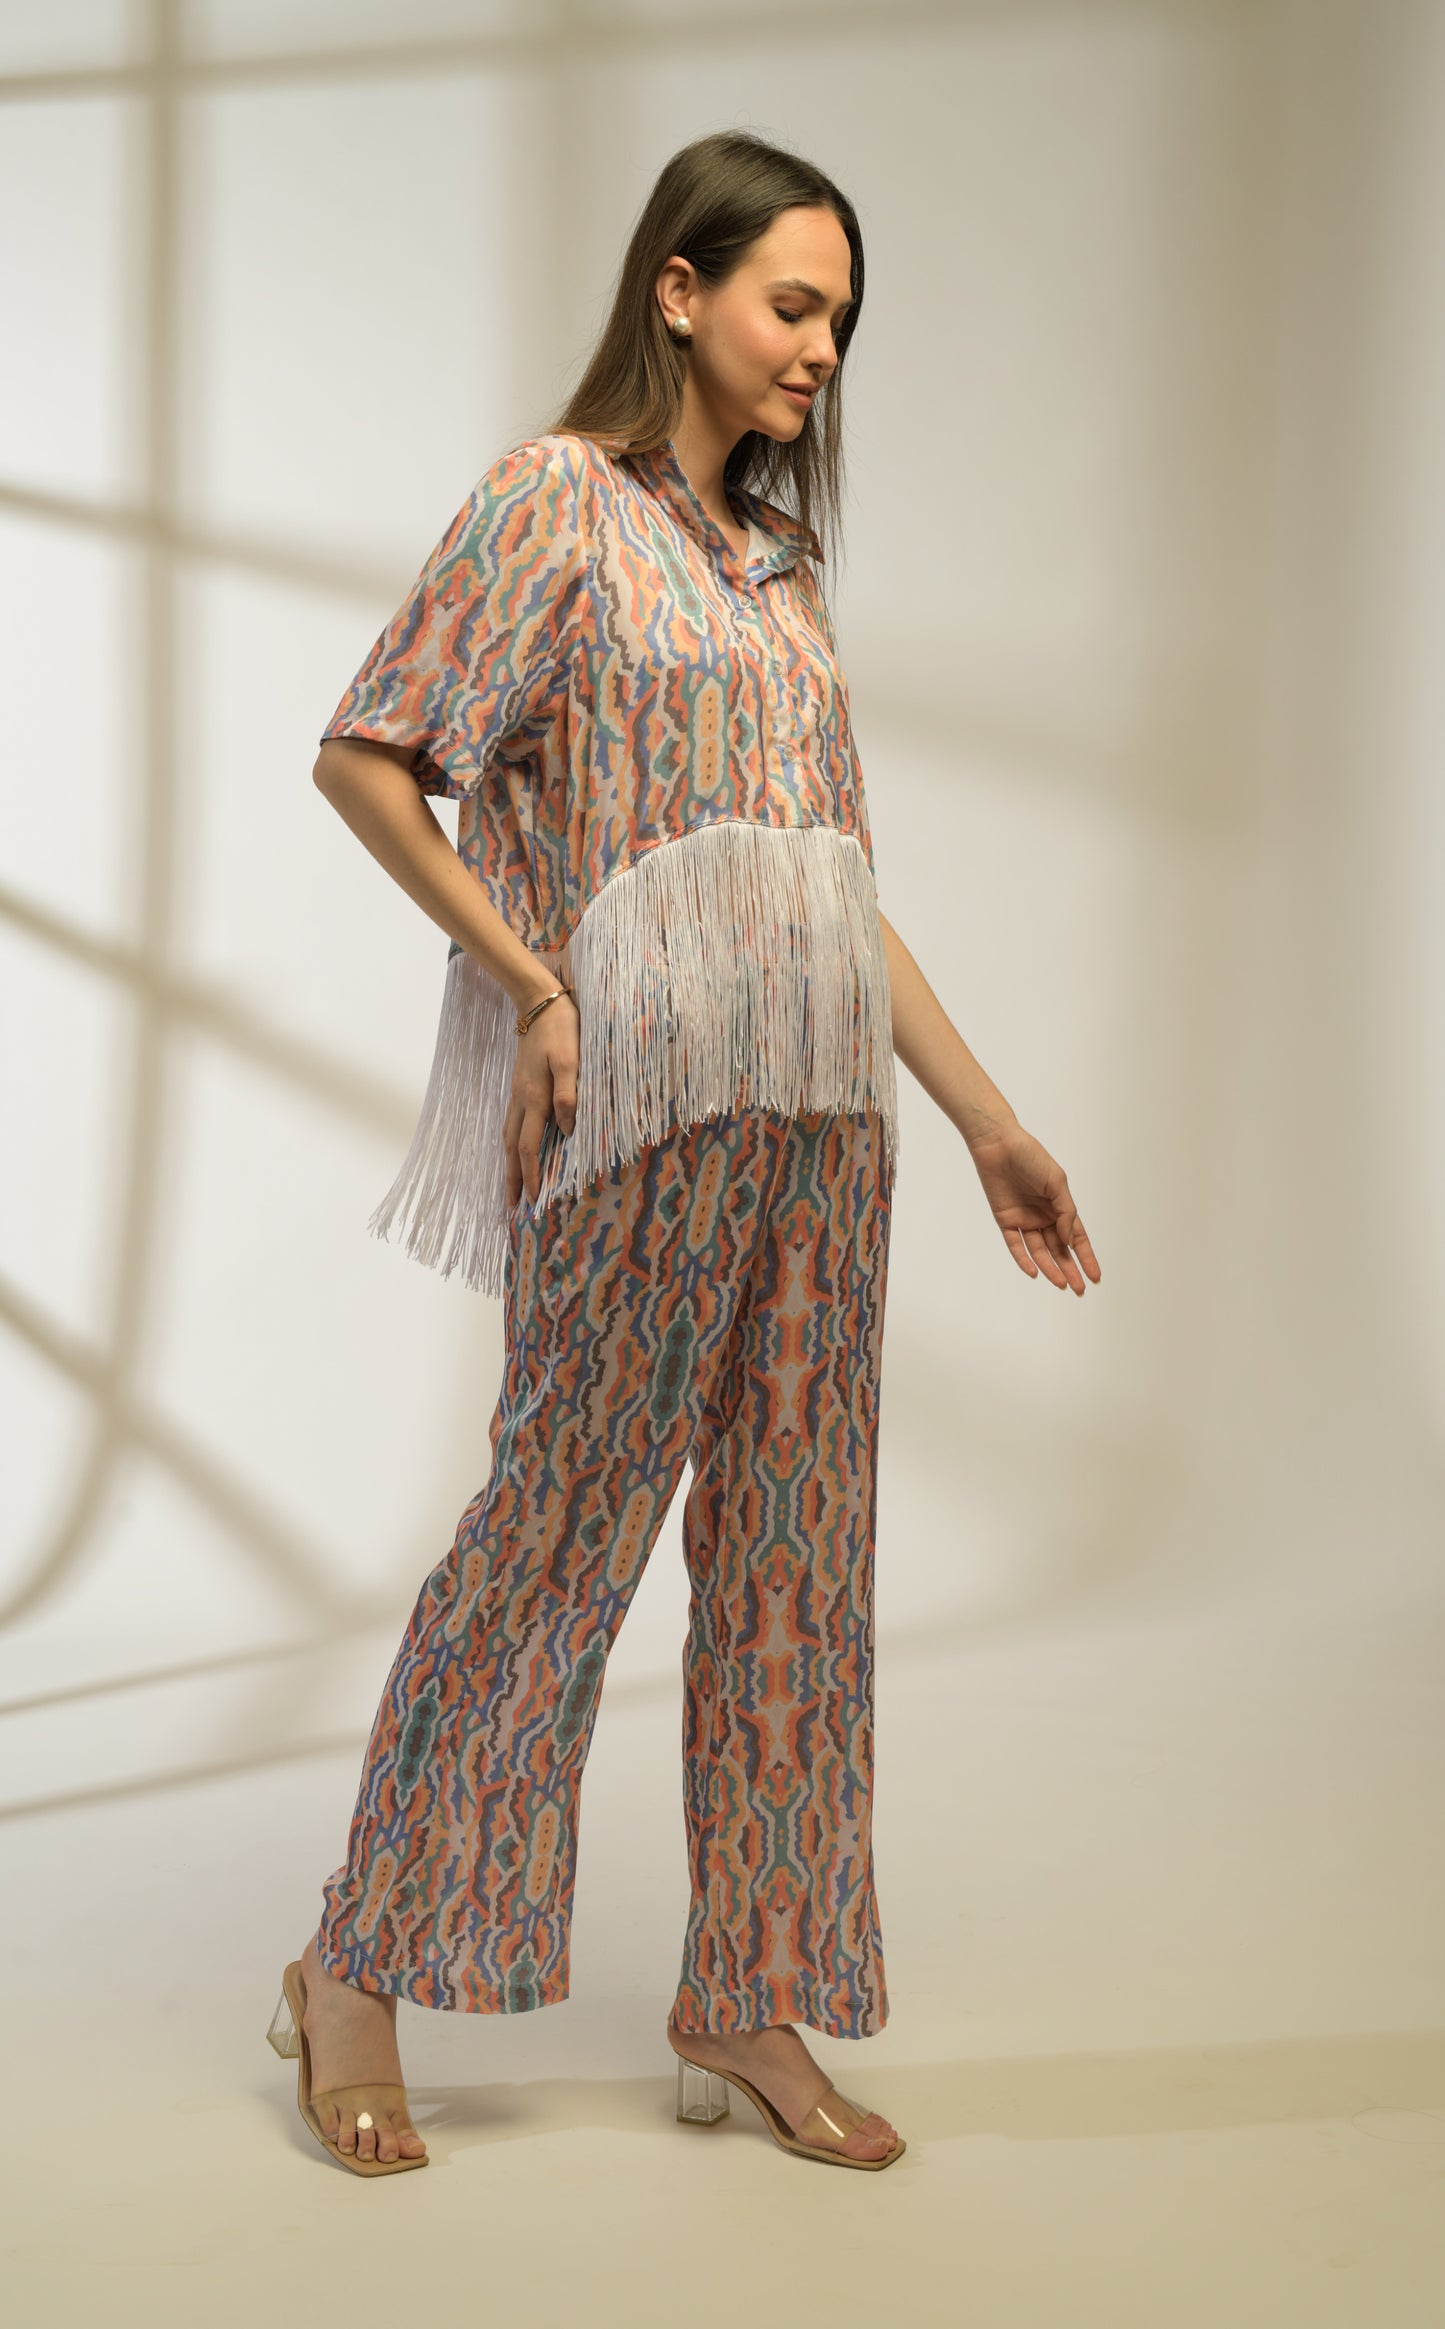 Kelly Boxy Shirt in Printed Viscose Crepe with Fringe Detailing and straight fit pants - Set of 2